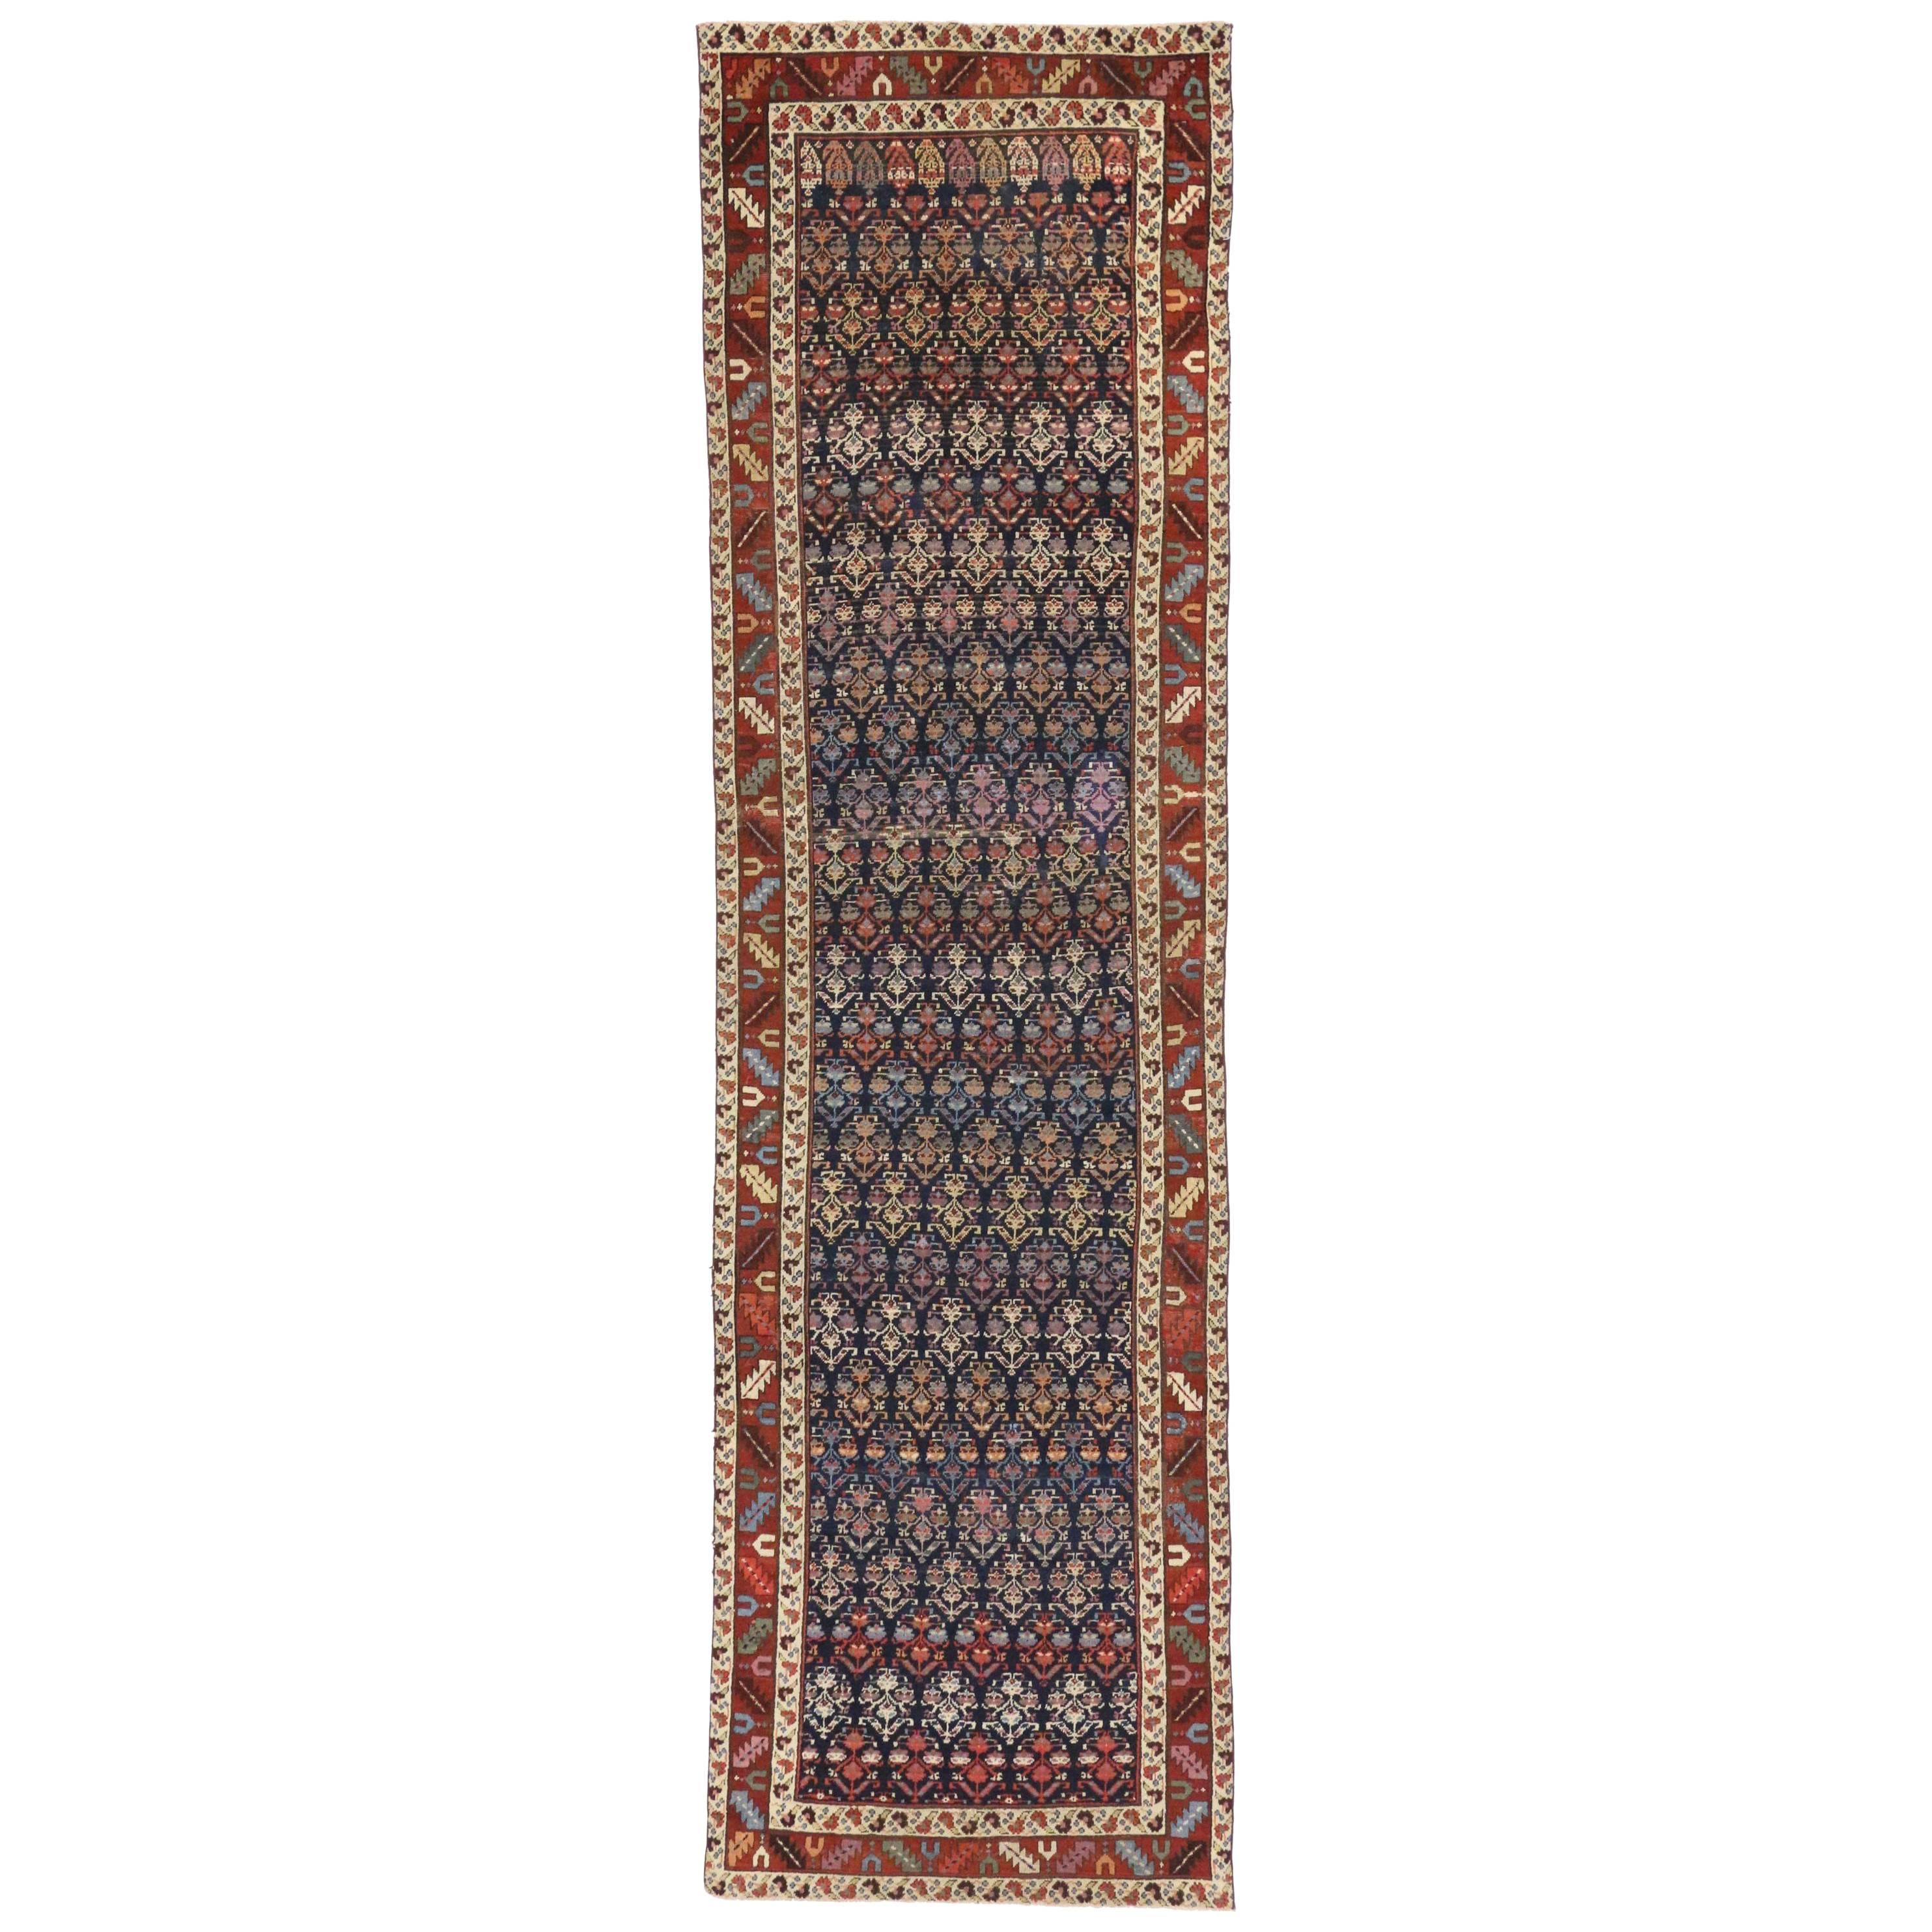 Antique Caucasian Shirvan Runner with Boteh Pattern and Modern Federal Style